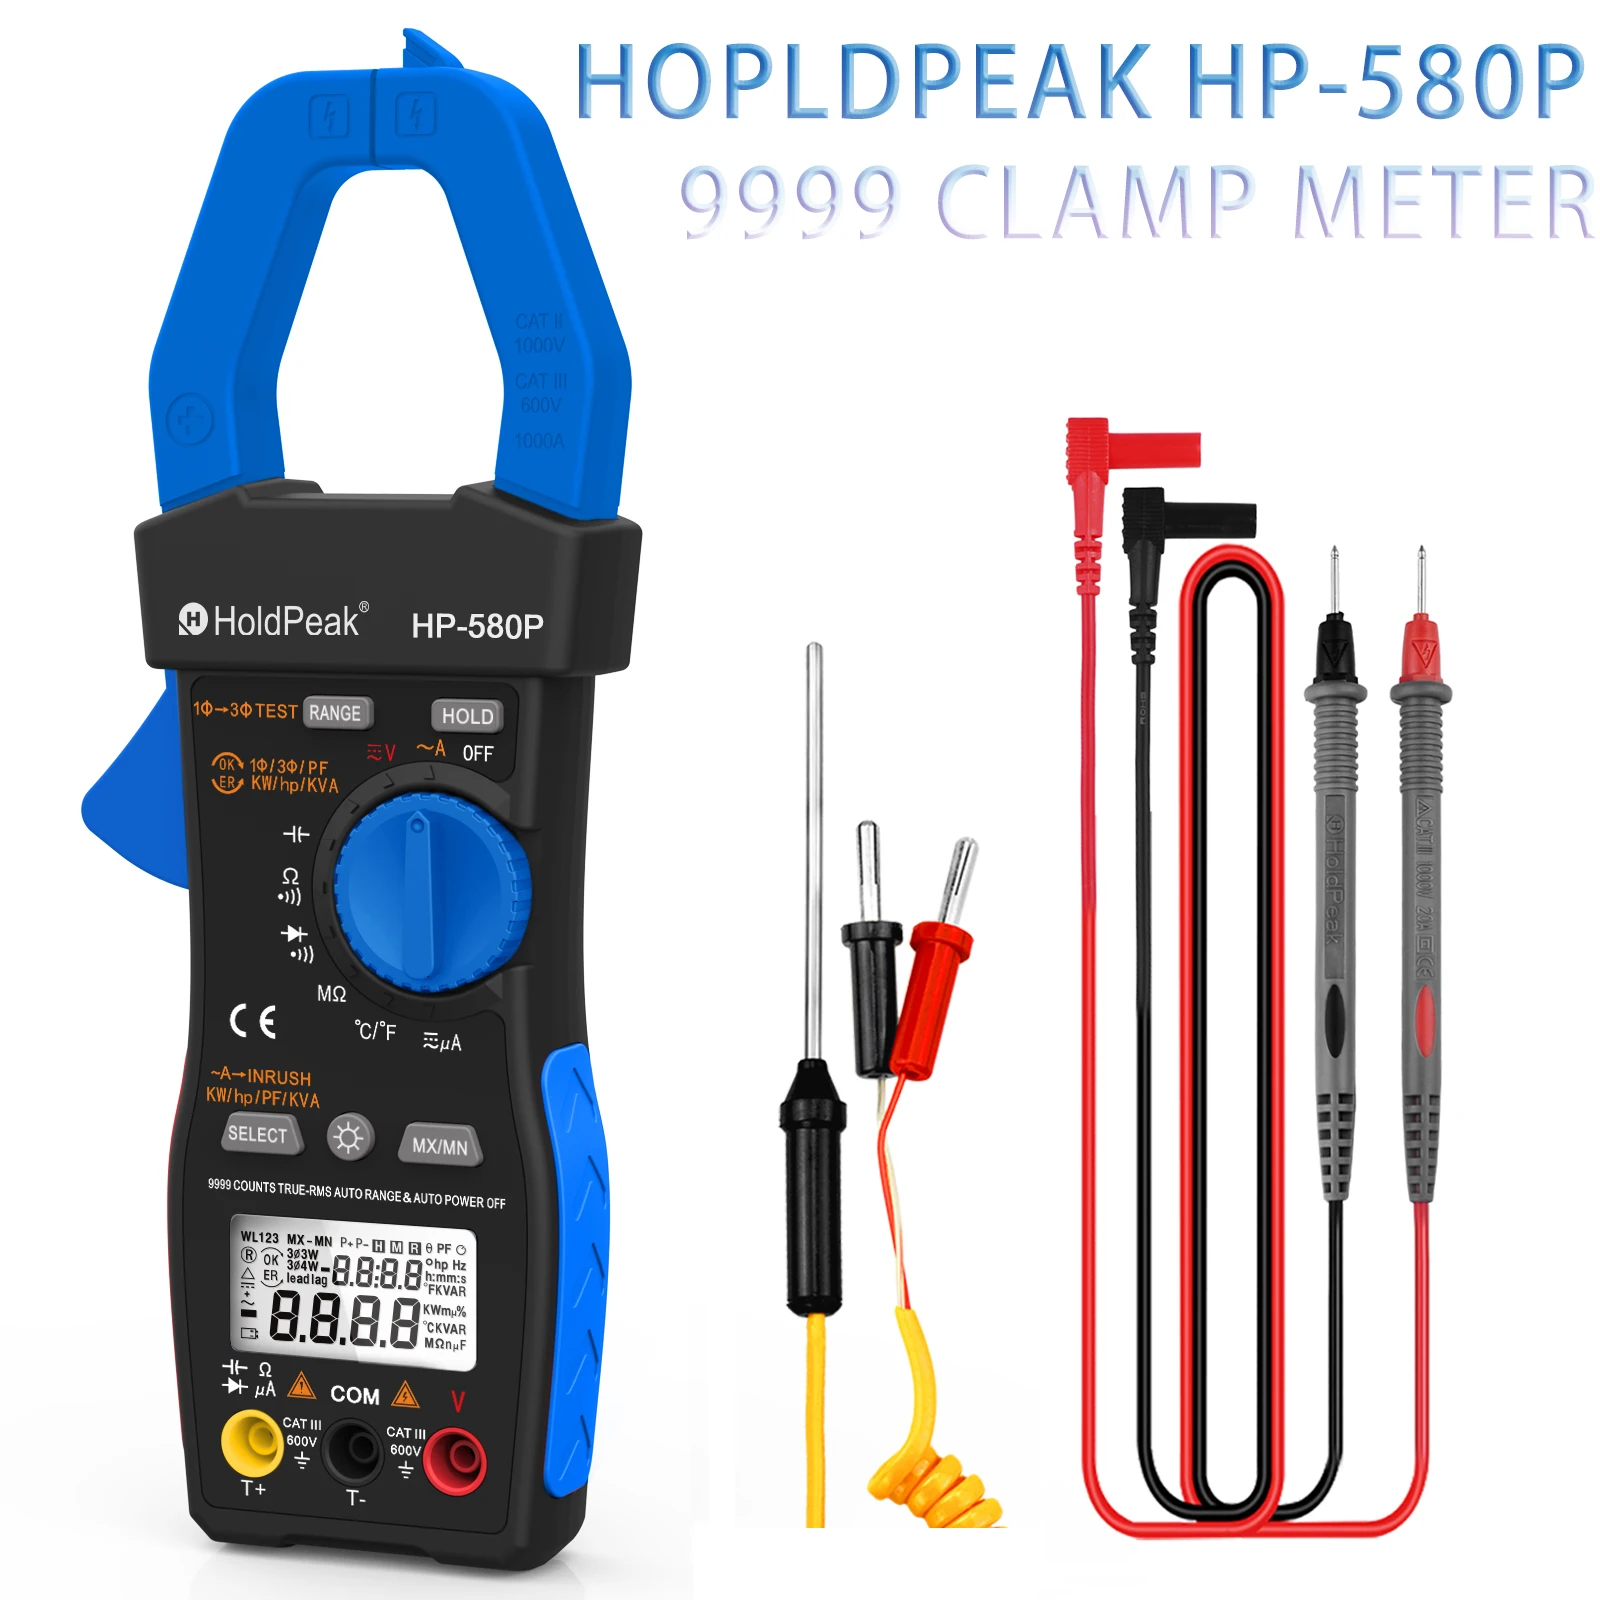 HOLDPEAK HP-580P 1-Phase/3-Phase Clamp Meter 9999 Display Power Tester Meter In-Rush Current,True RMS,ACV,ACA,KW,KVA,for HVAC